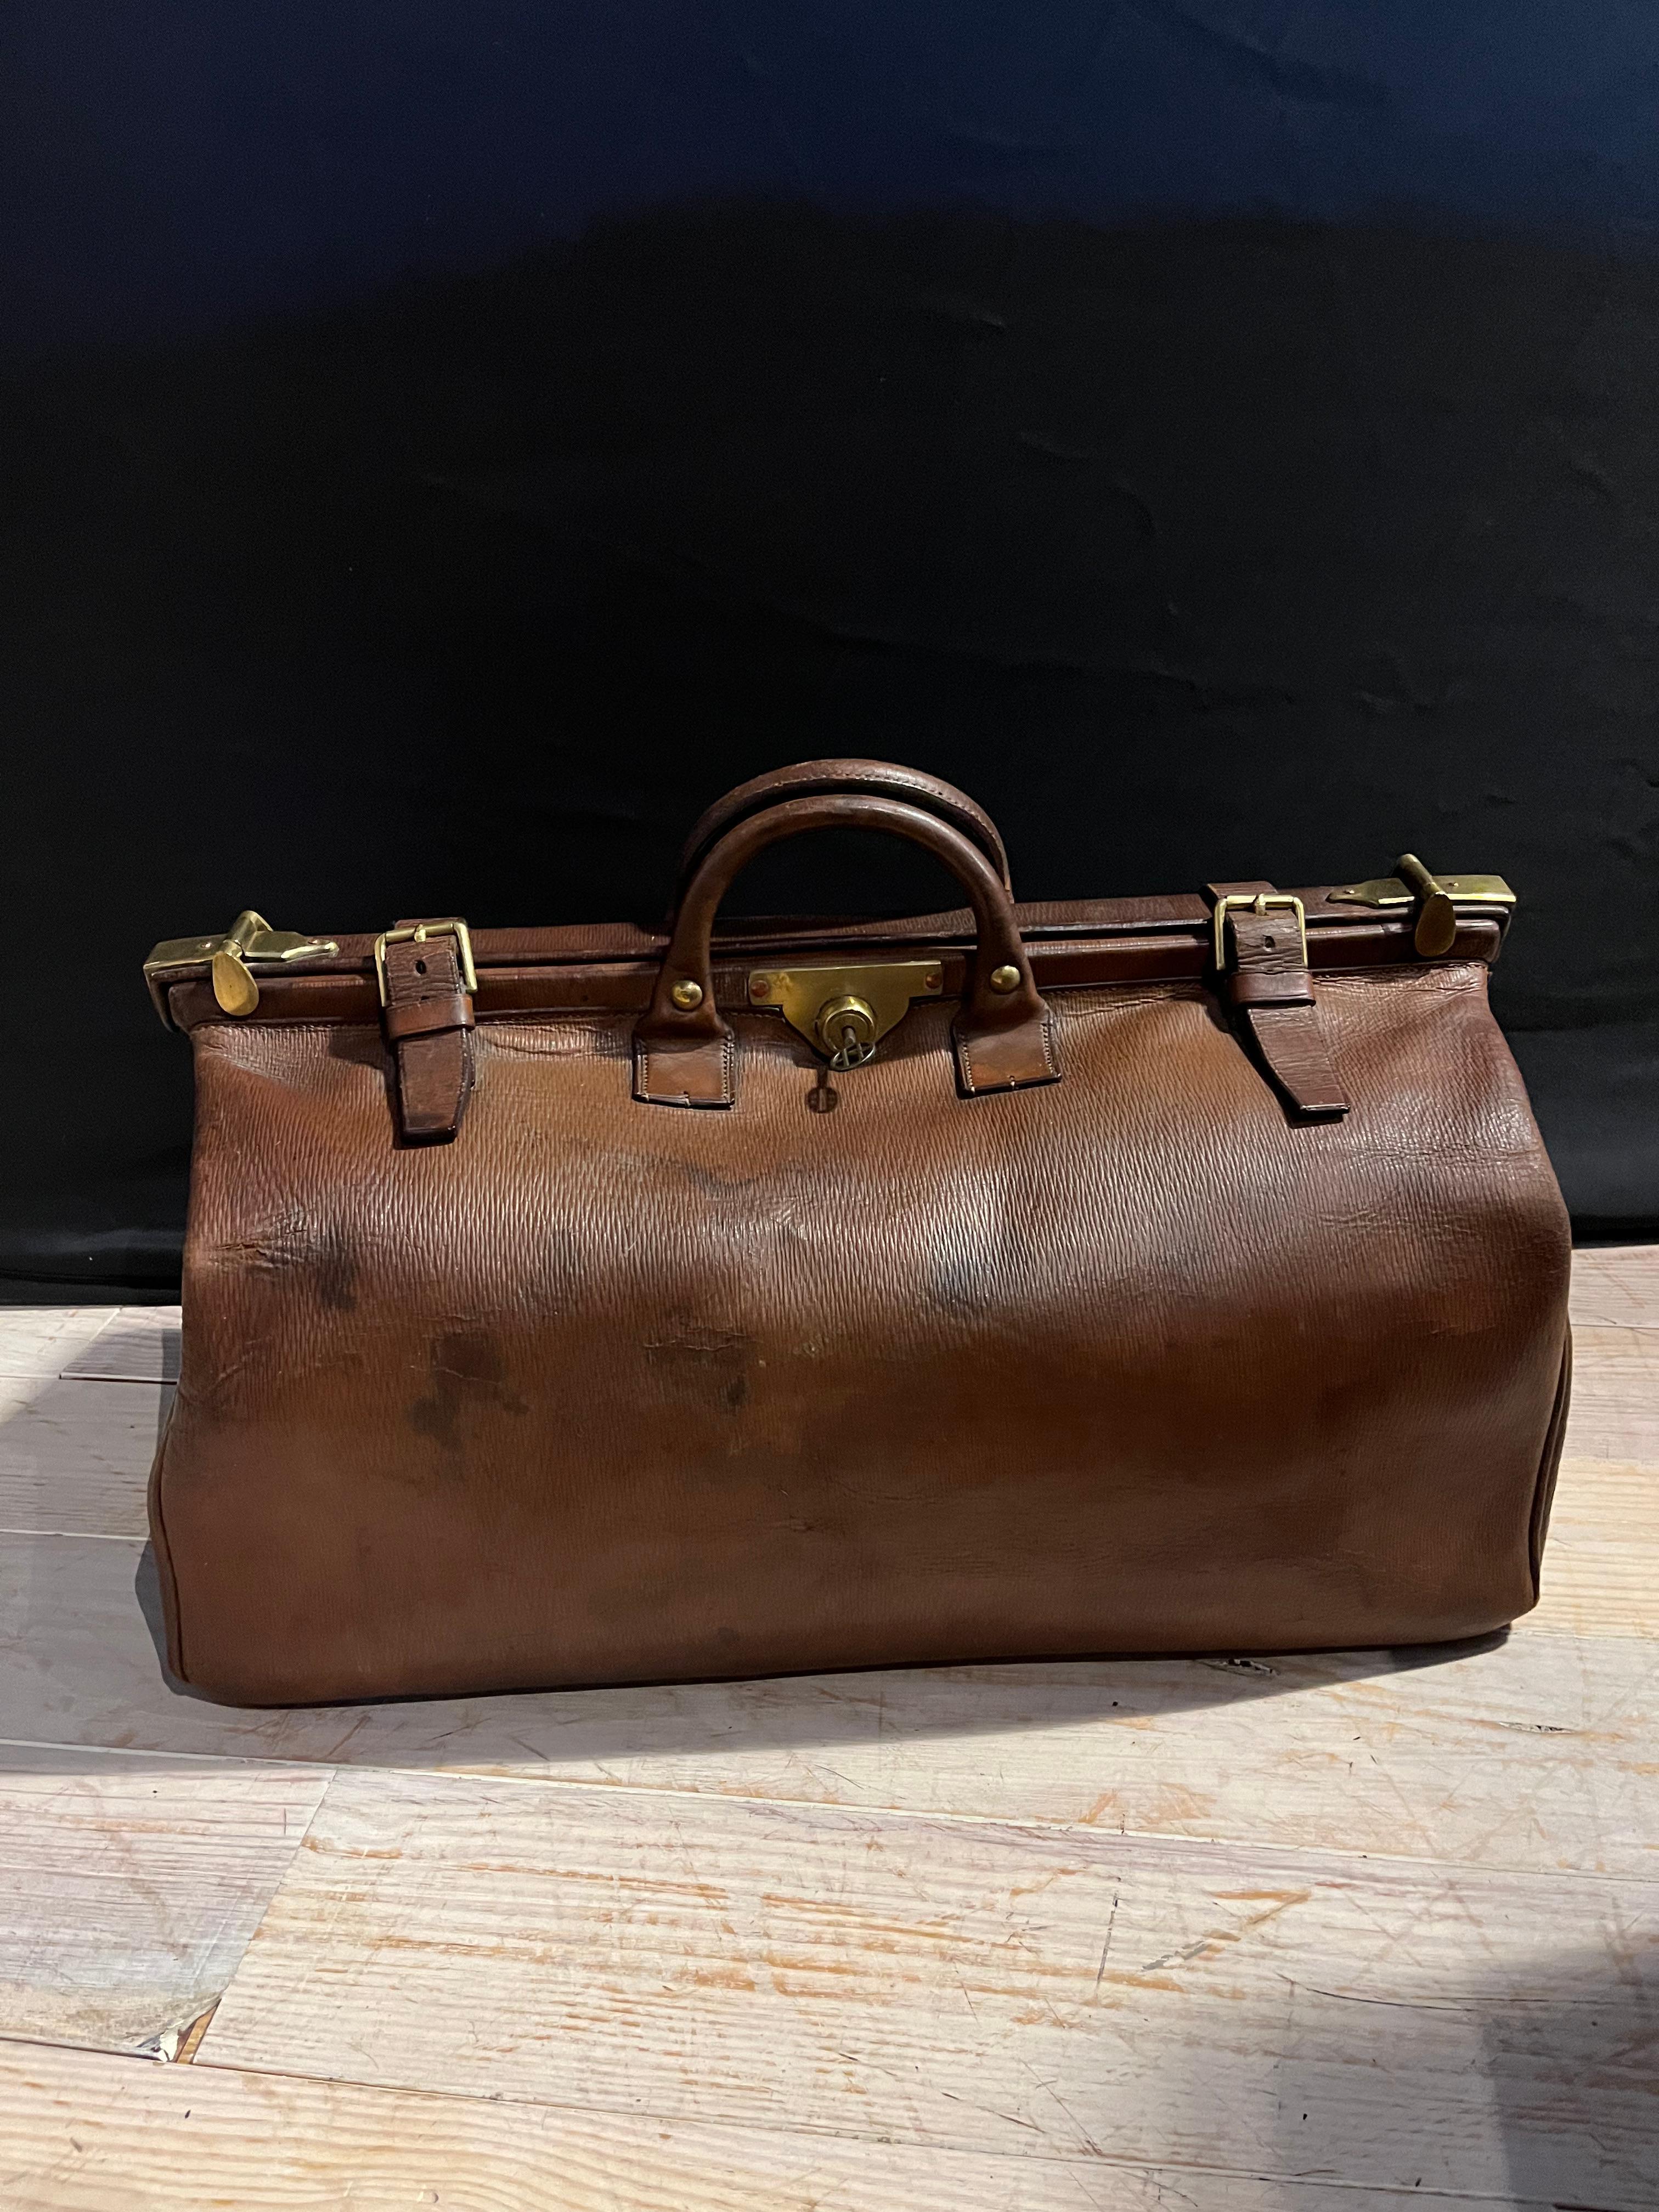 1920's Gladstone Bag in perfect condition. The bag closings are in perfect shape and condition and everything works perfectly. The bag has some minor spots but for the age of the bag that is minor.